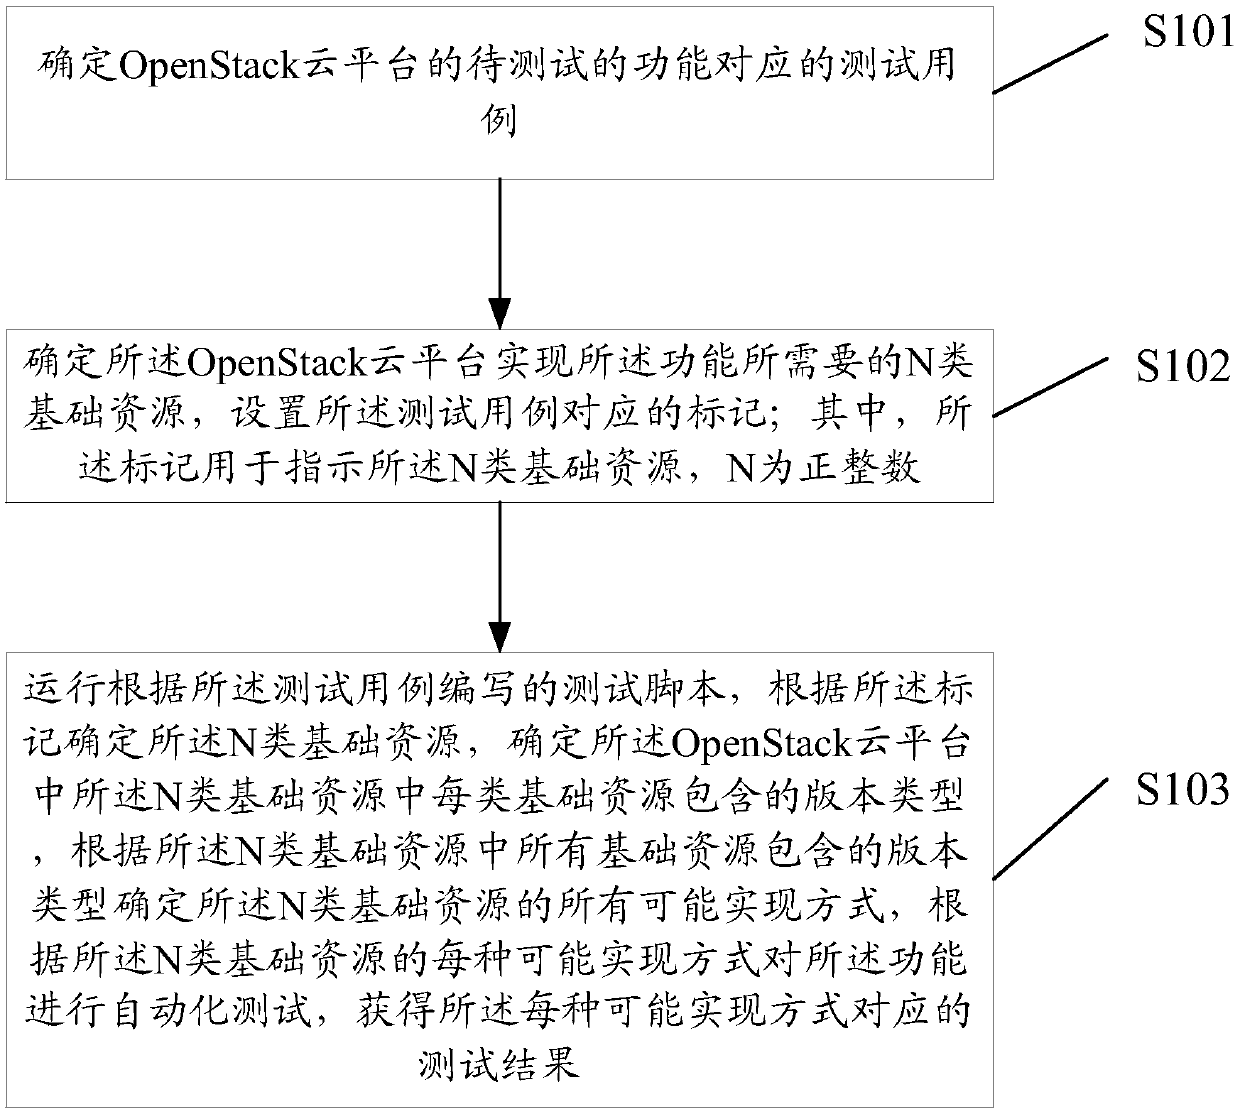 OpenStack test method and OpenStack test device